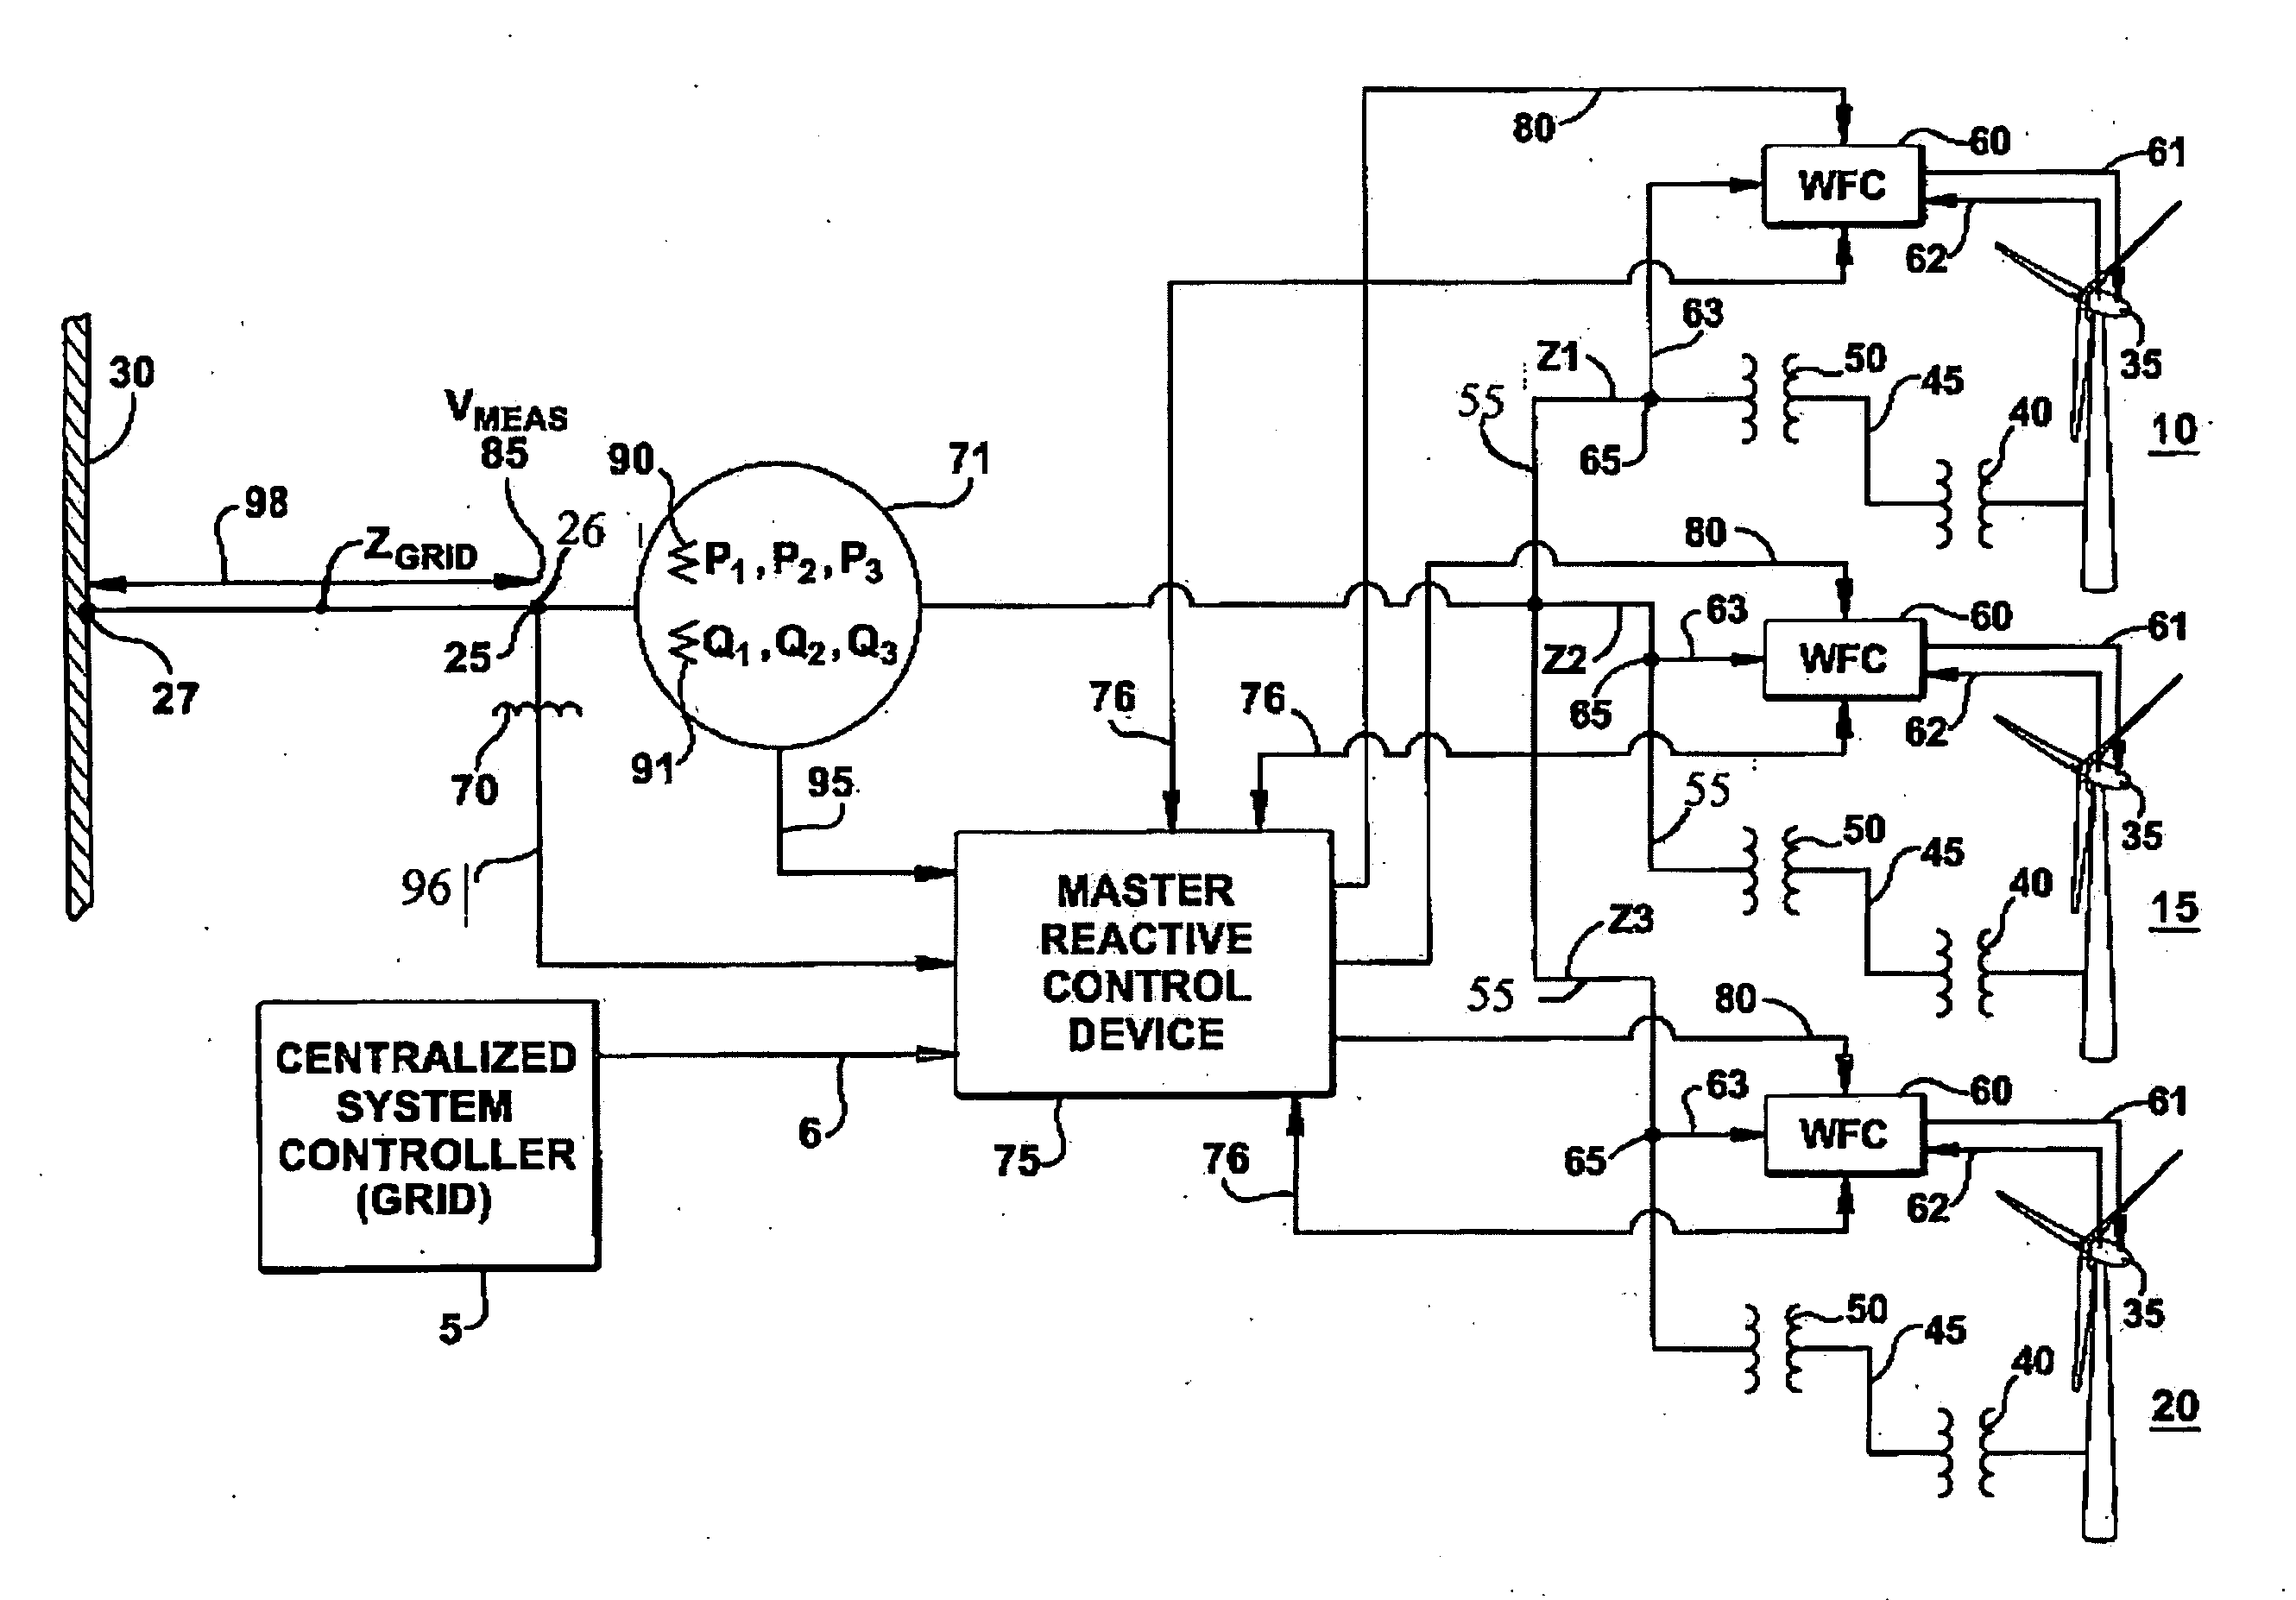 Intra-area master reactive controller for tightly coupled windfarms